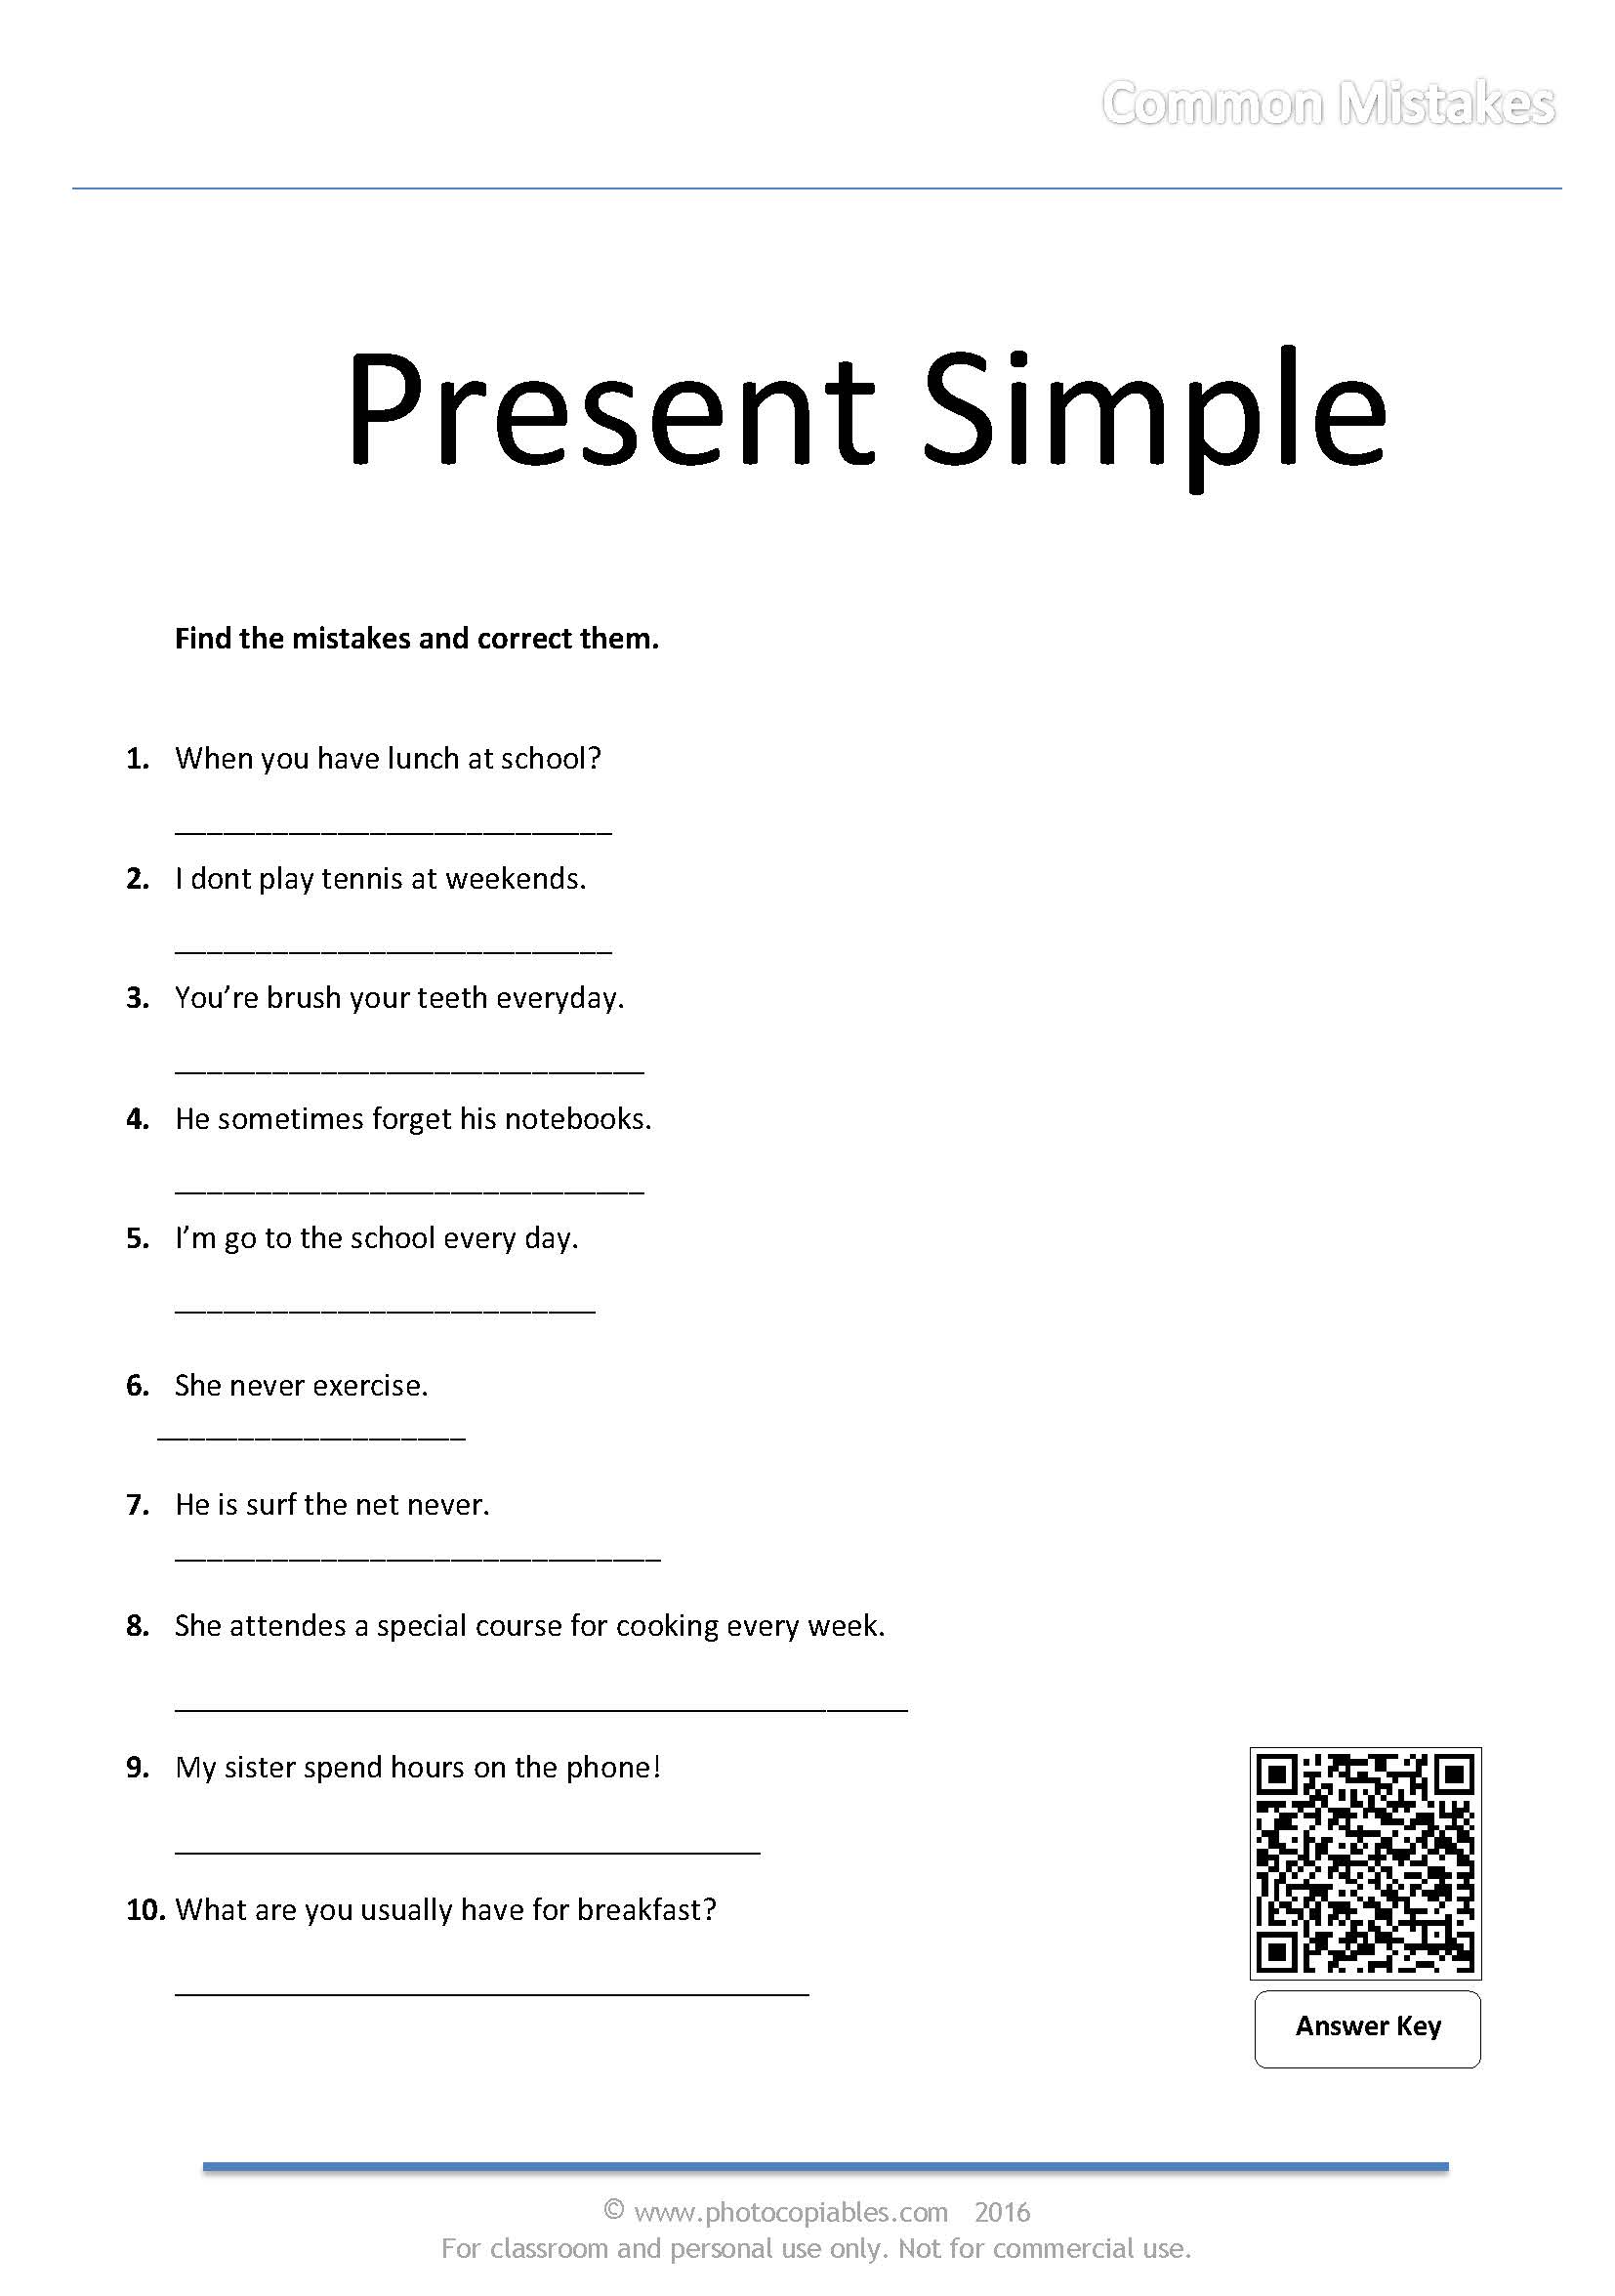 present-simple-common-mistakes-photocopiables